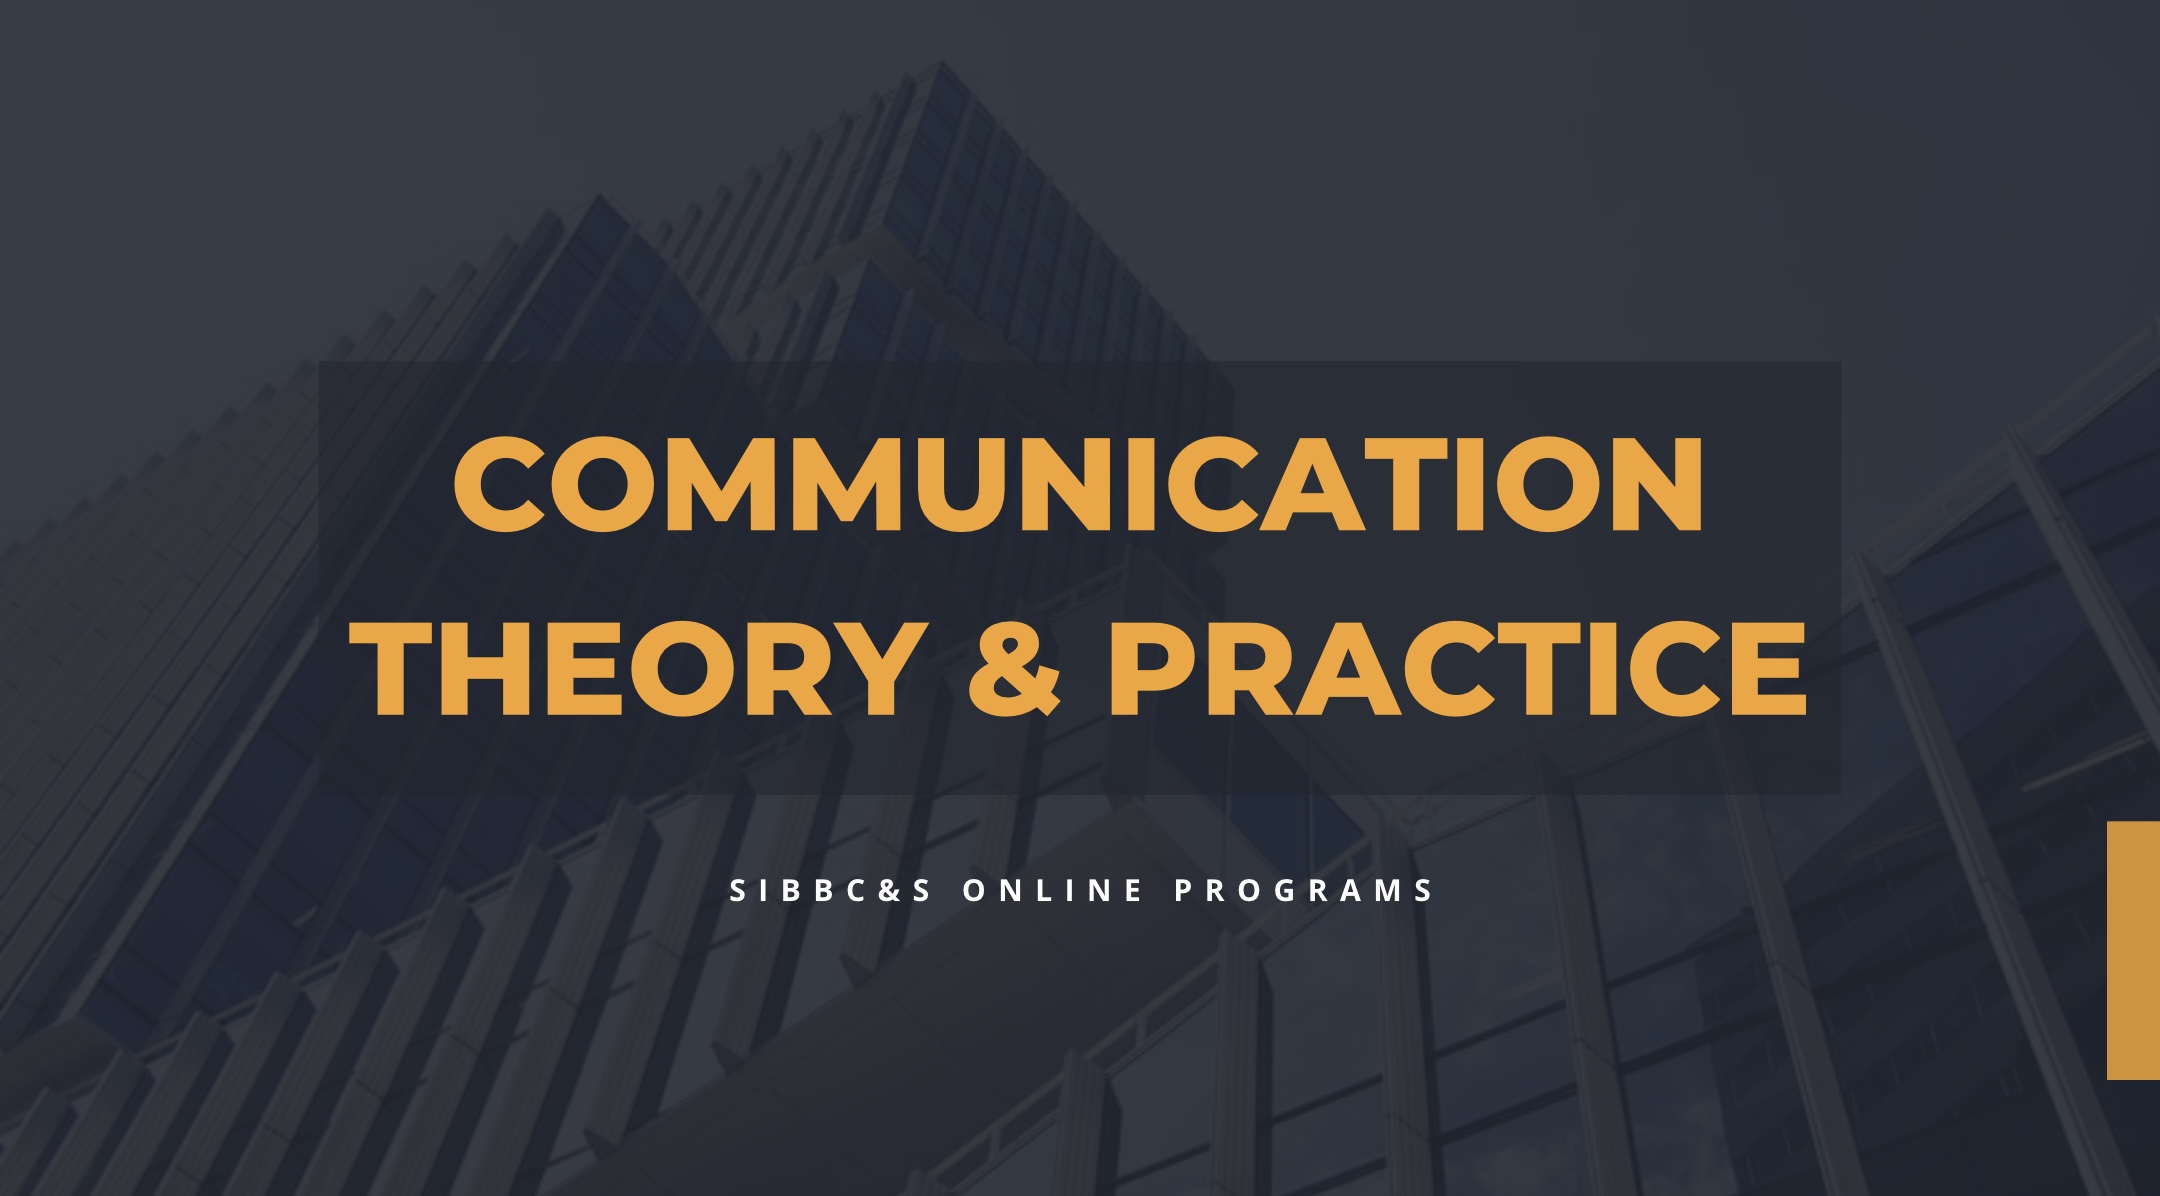 Communication Theory & Practice